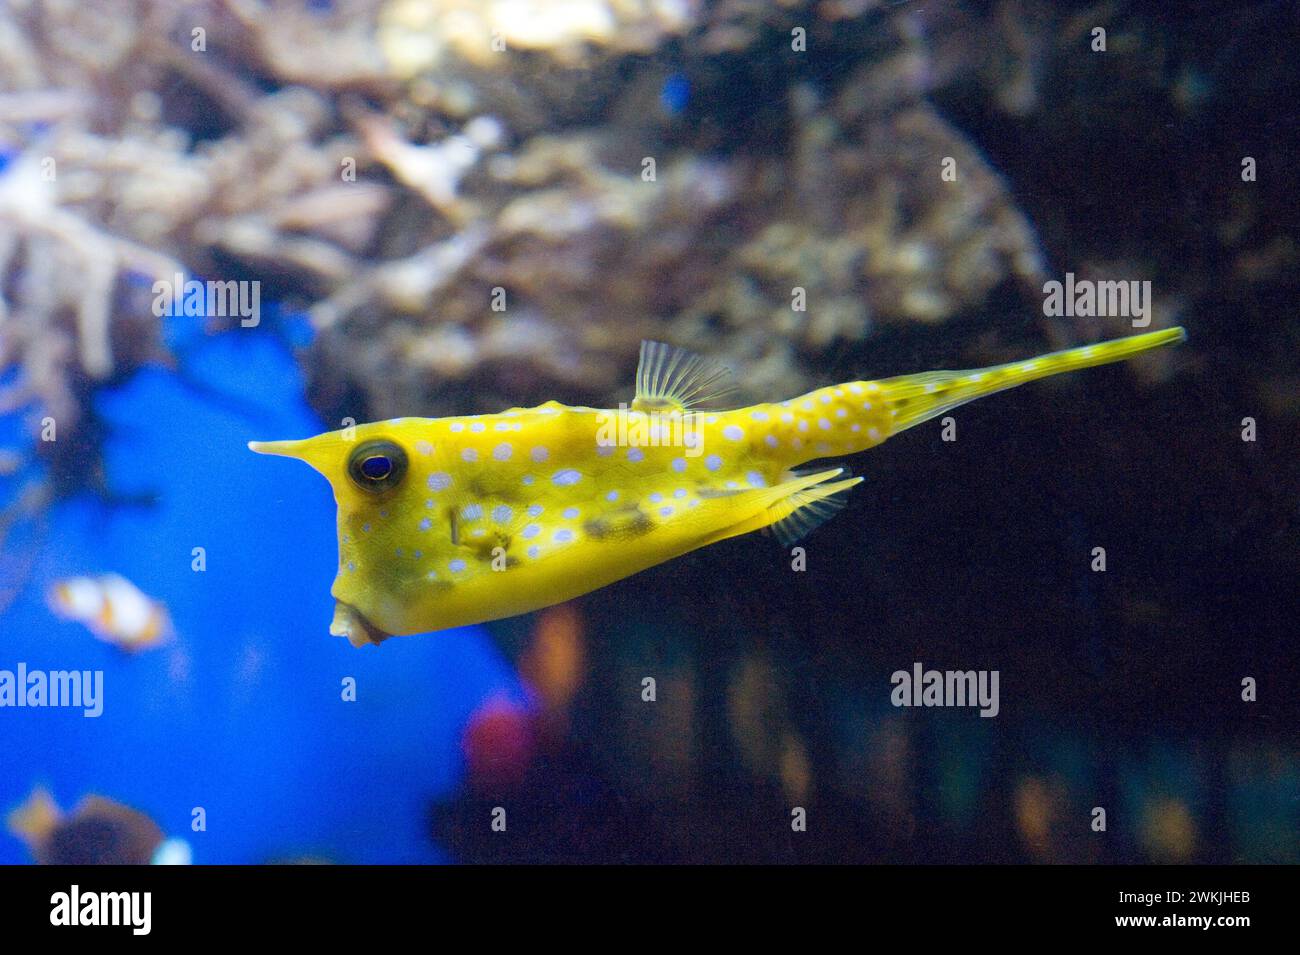 Longhorn cawfish or horned boxfish (Lactoria cornuta) is an omnivorous marine fish native to Tropical Indian and Pacific Ocean. Stock Photo